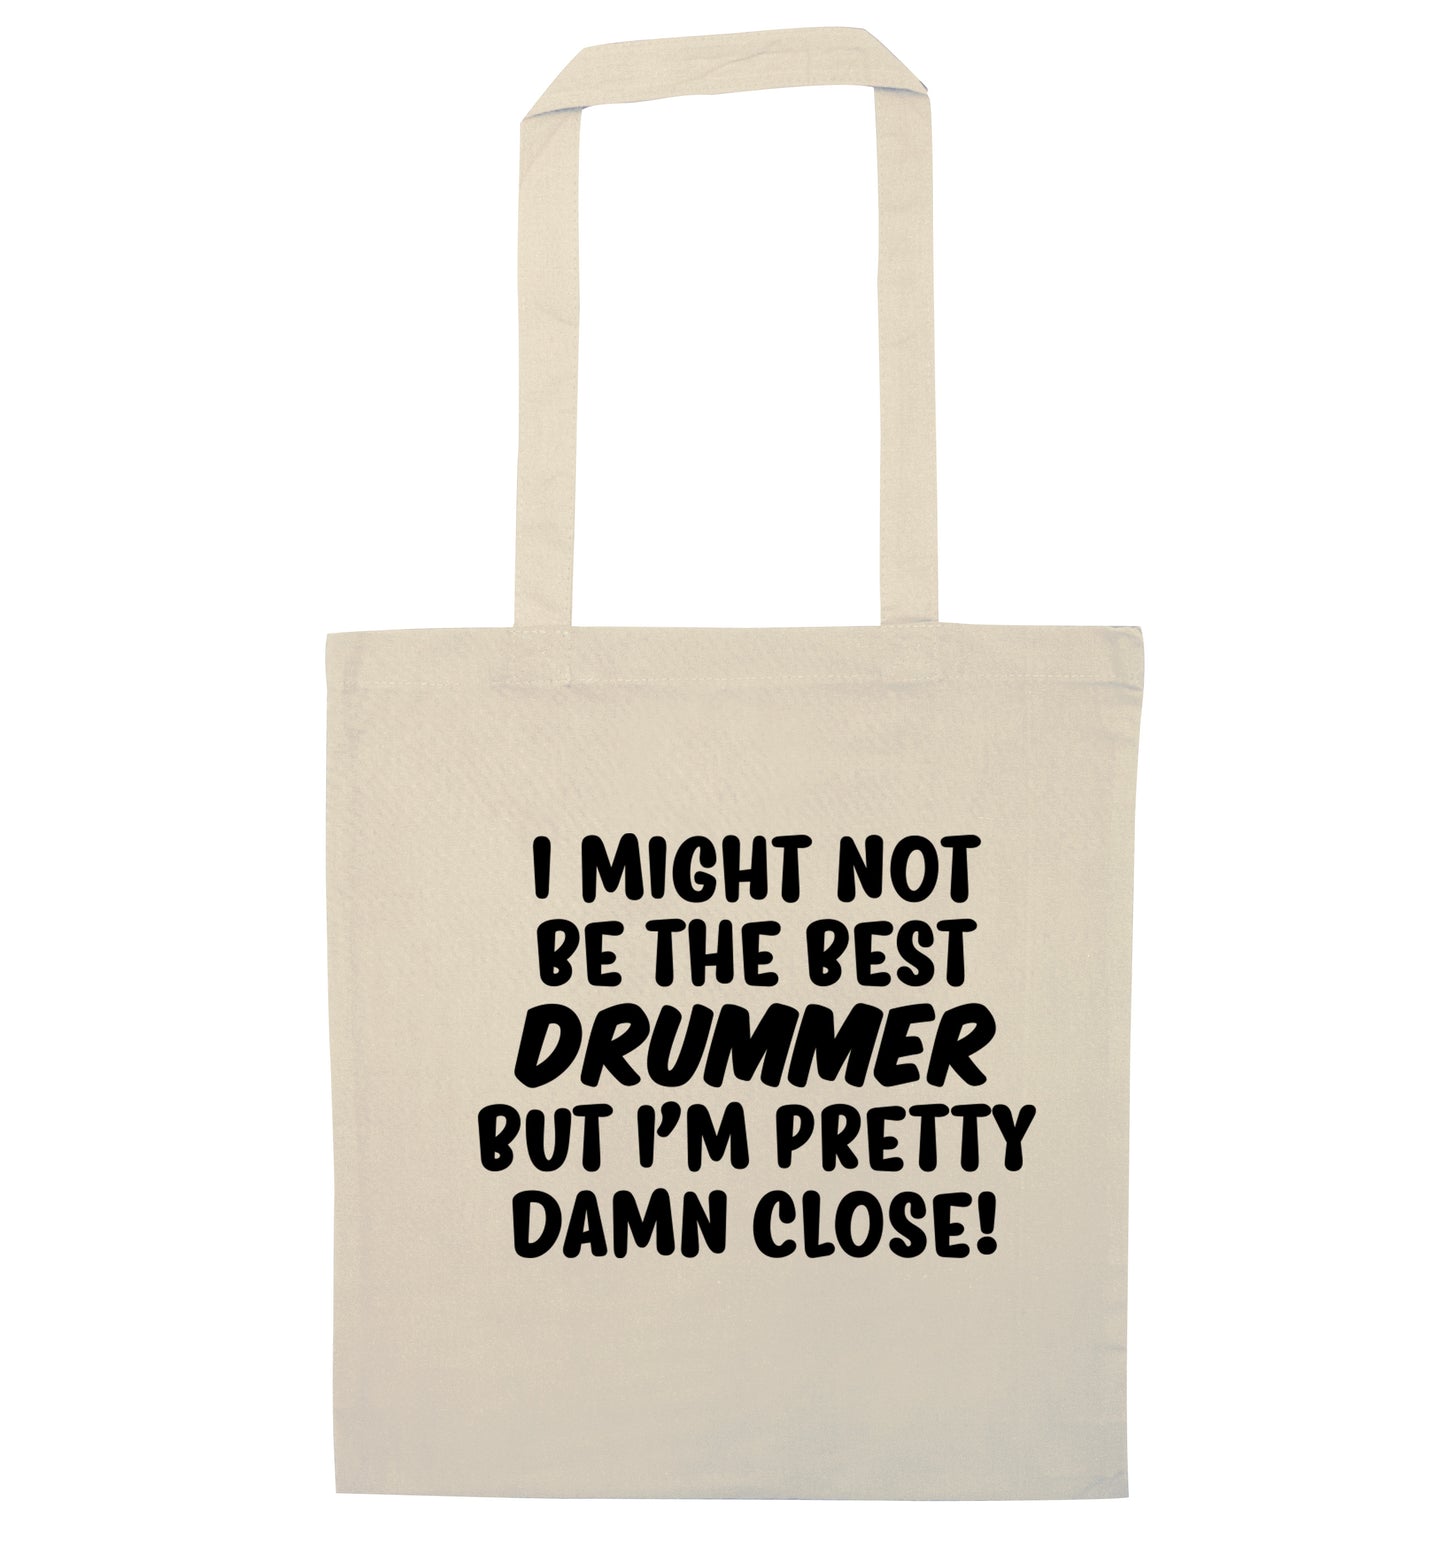 I might not be the best drummer but I'm pretty close! natural tote bag